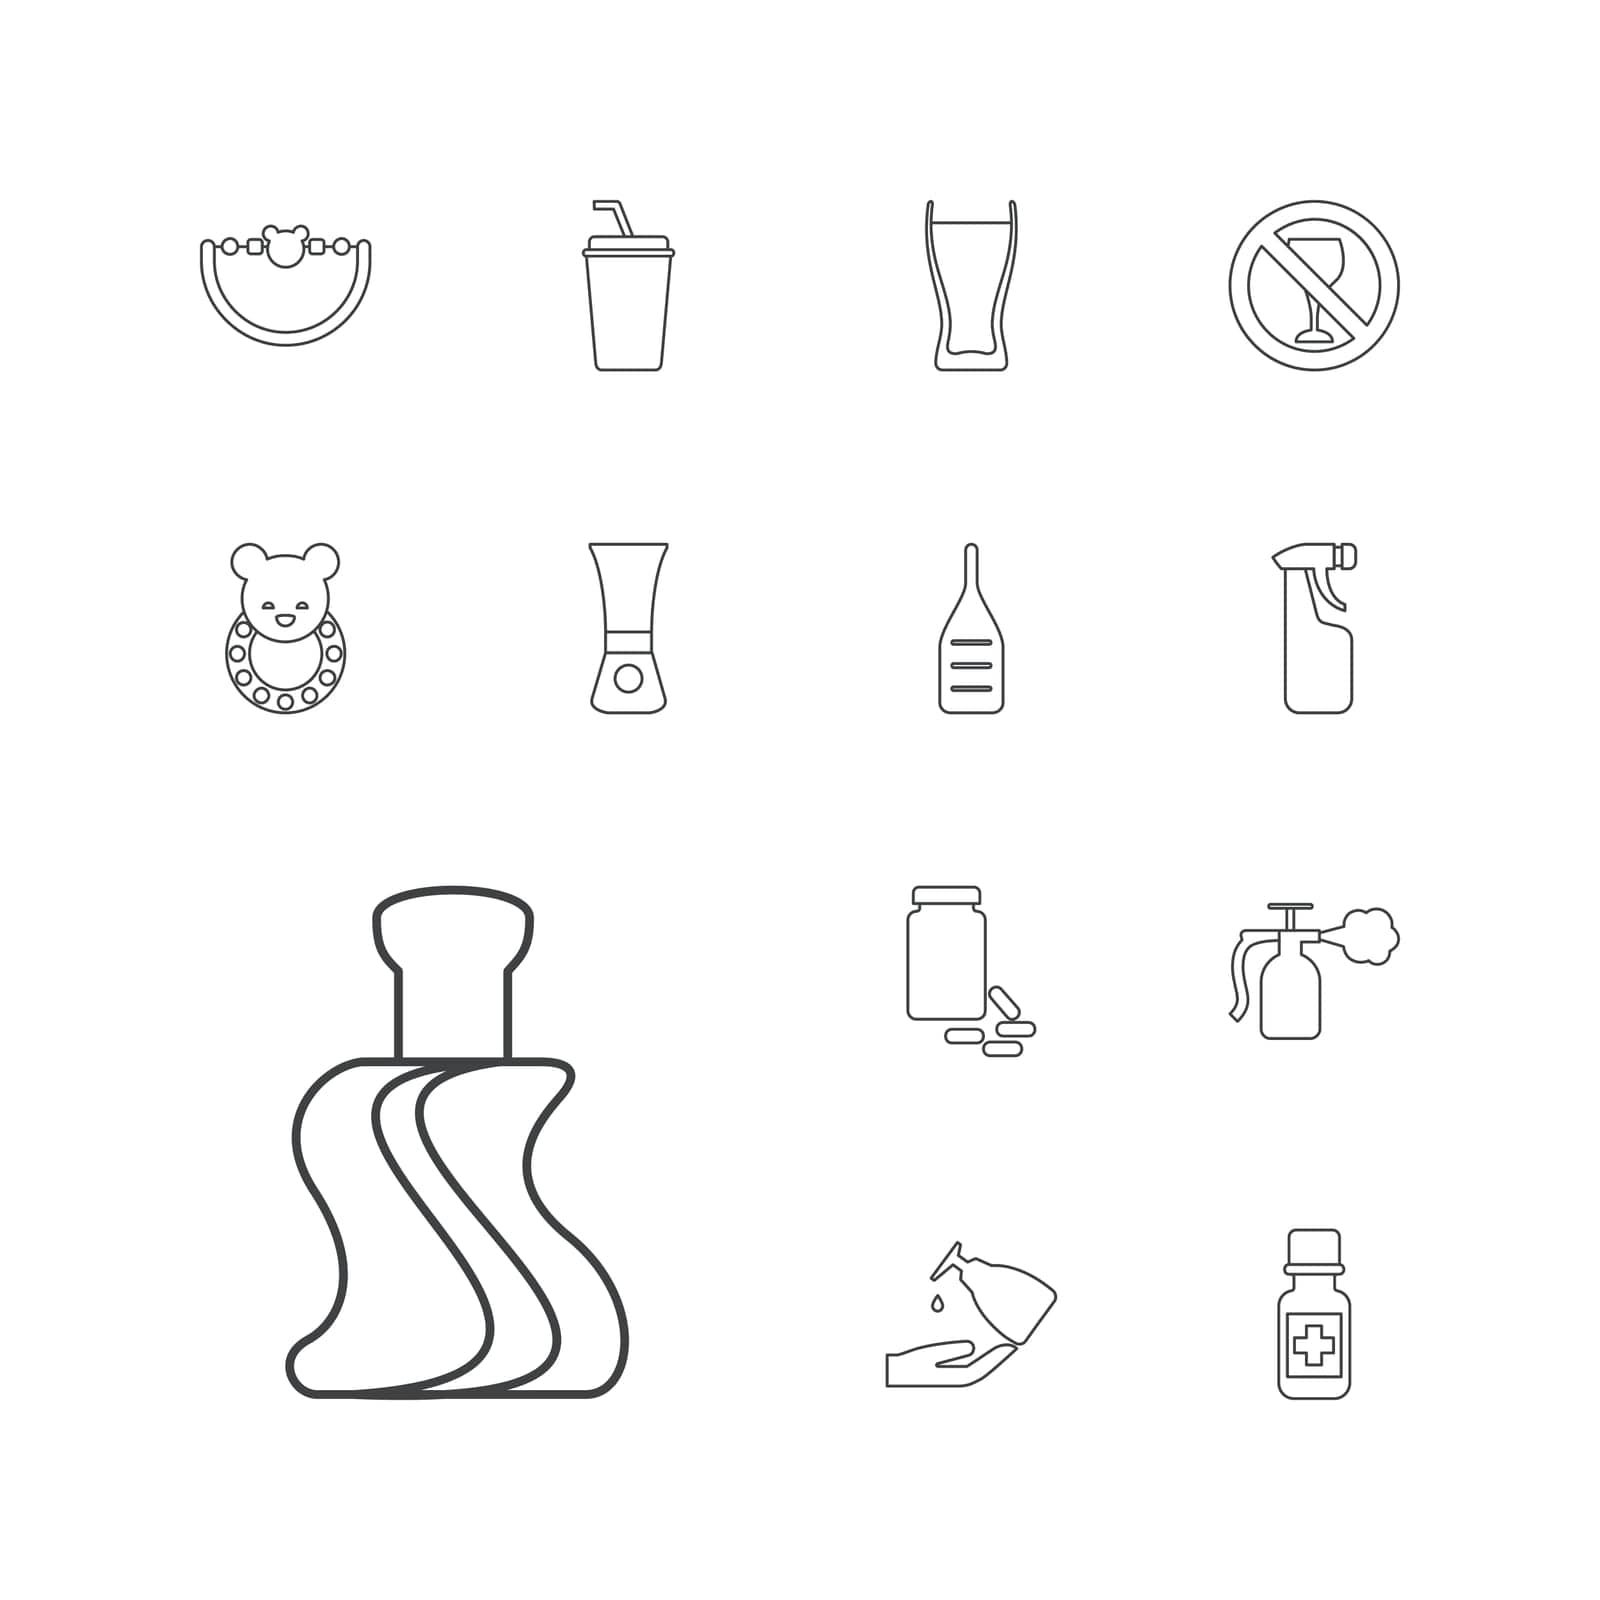 container,symbol,no,icon,sign,isolated,bottle,white,flat,fitness,design,beverage,vector,graphic,beer,element,toy,alcohol,glass,set,spray,nail,black,health,cream,medicine,drink,cleanser,plastic,tube,liquid,background,silhouette,baby,illustration,polish,soap